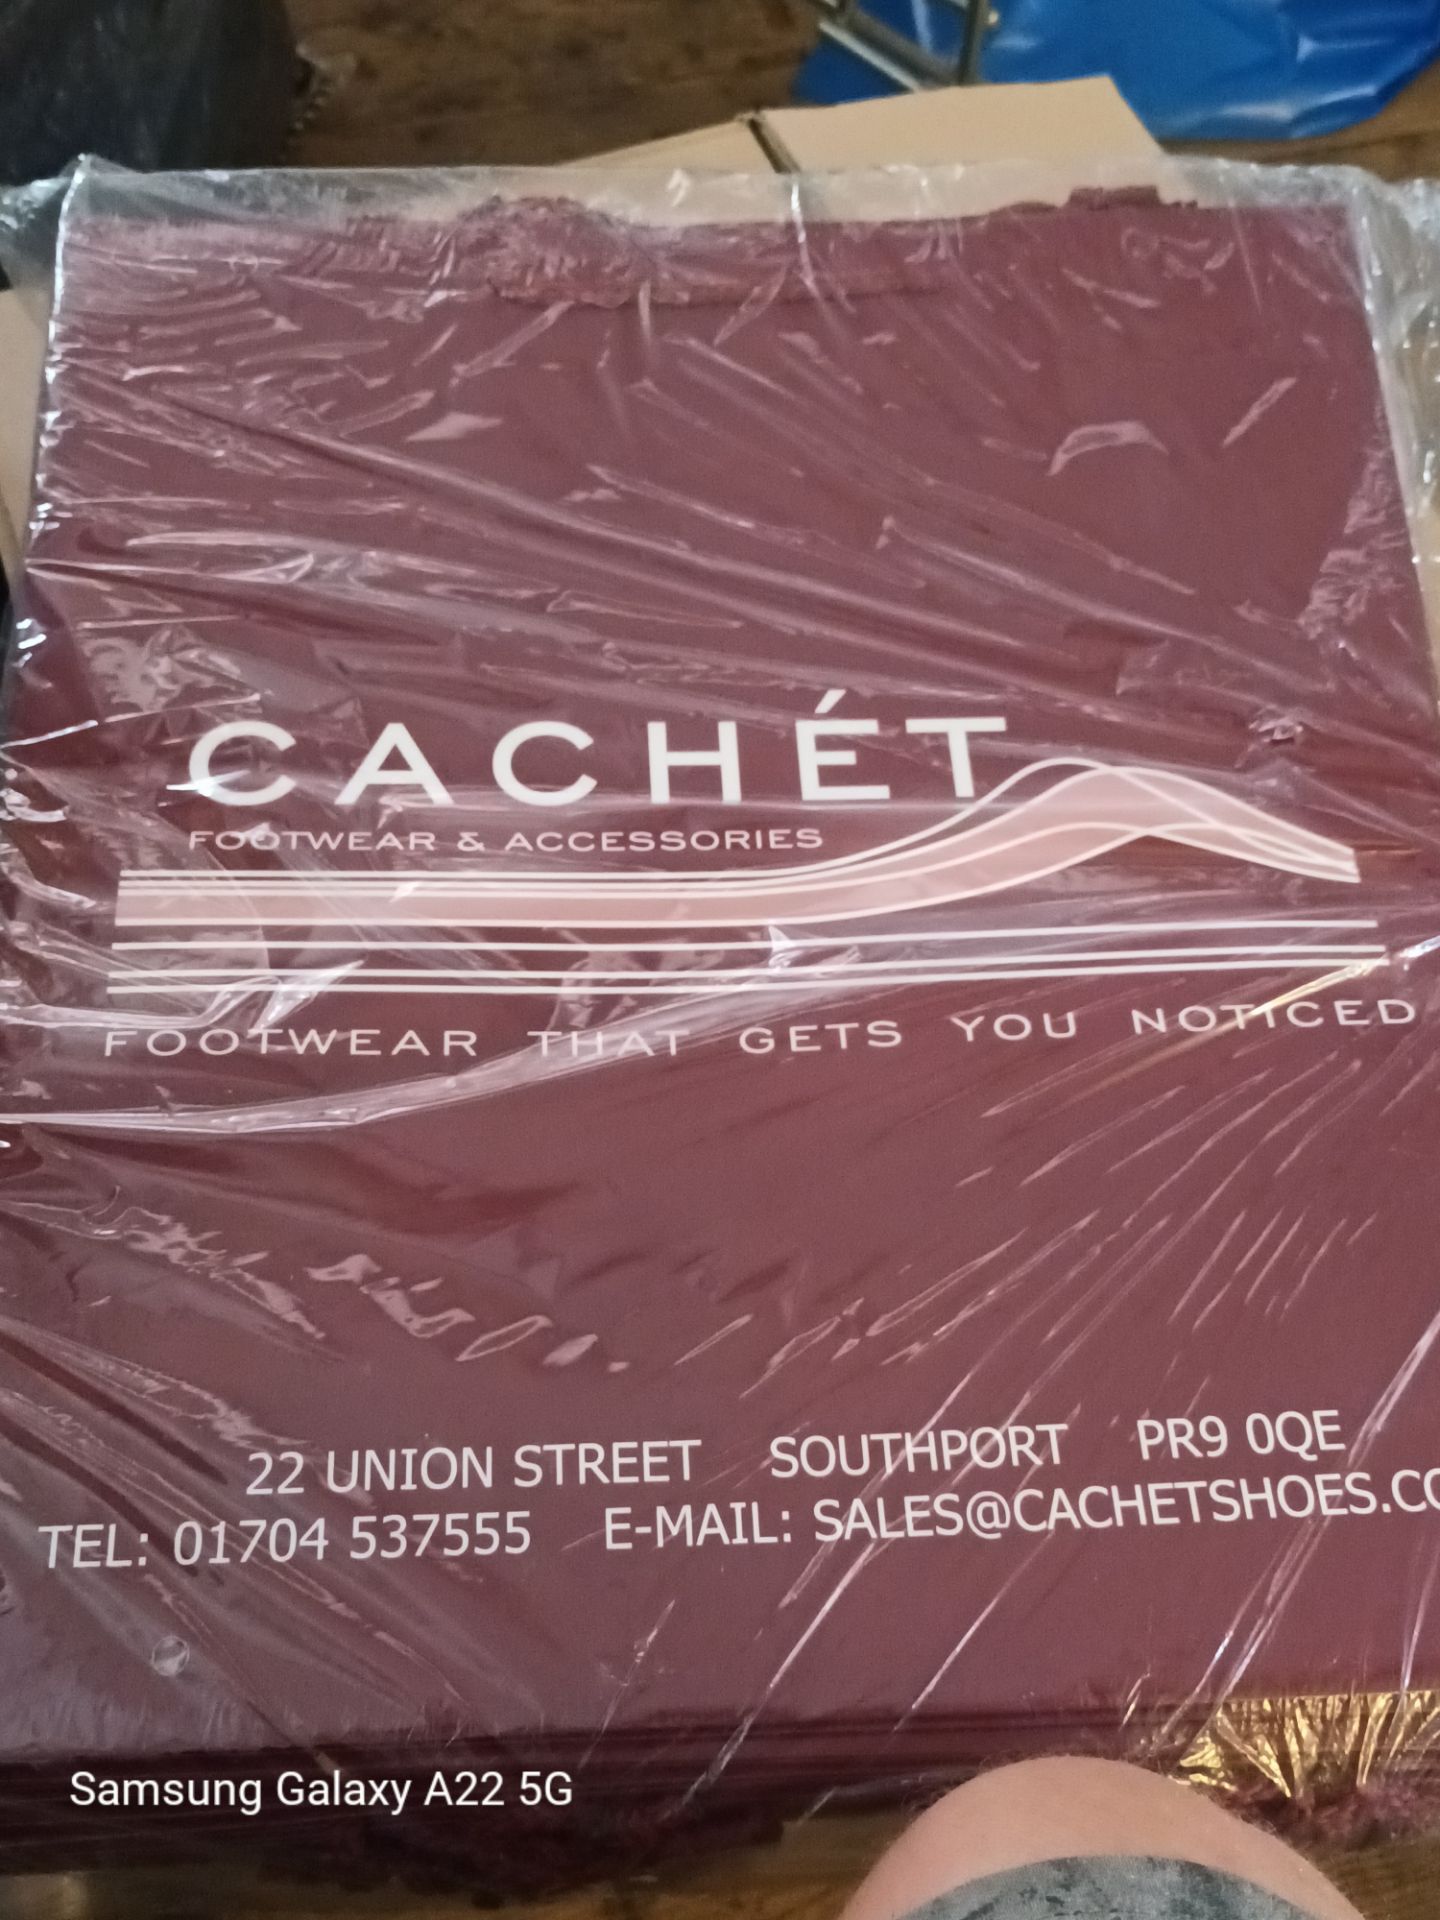 PALLET OF 400 X CACHET BAGS AND 53 PARTY PHOTO BOOTHS - Image 2 of 3